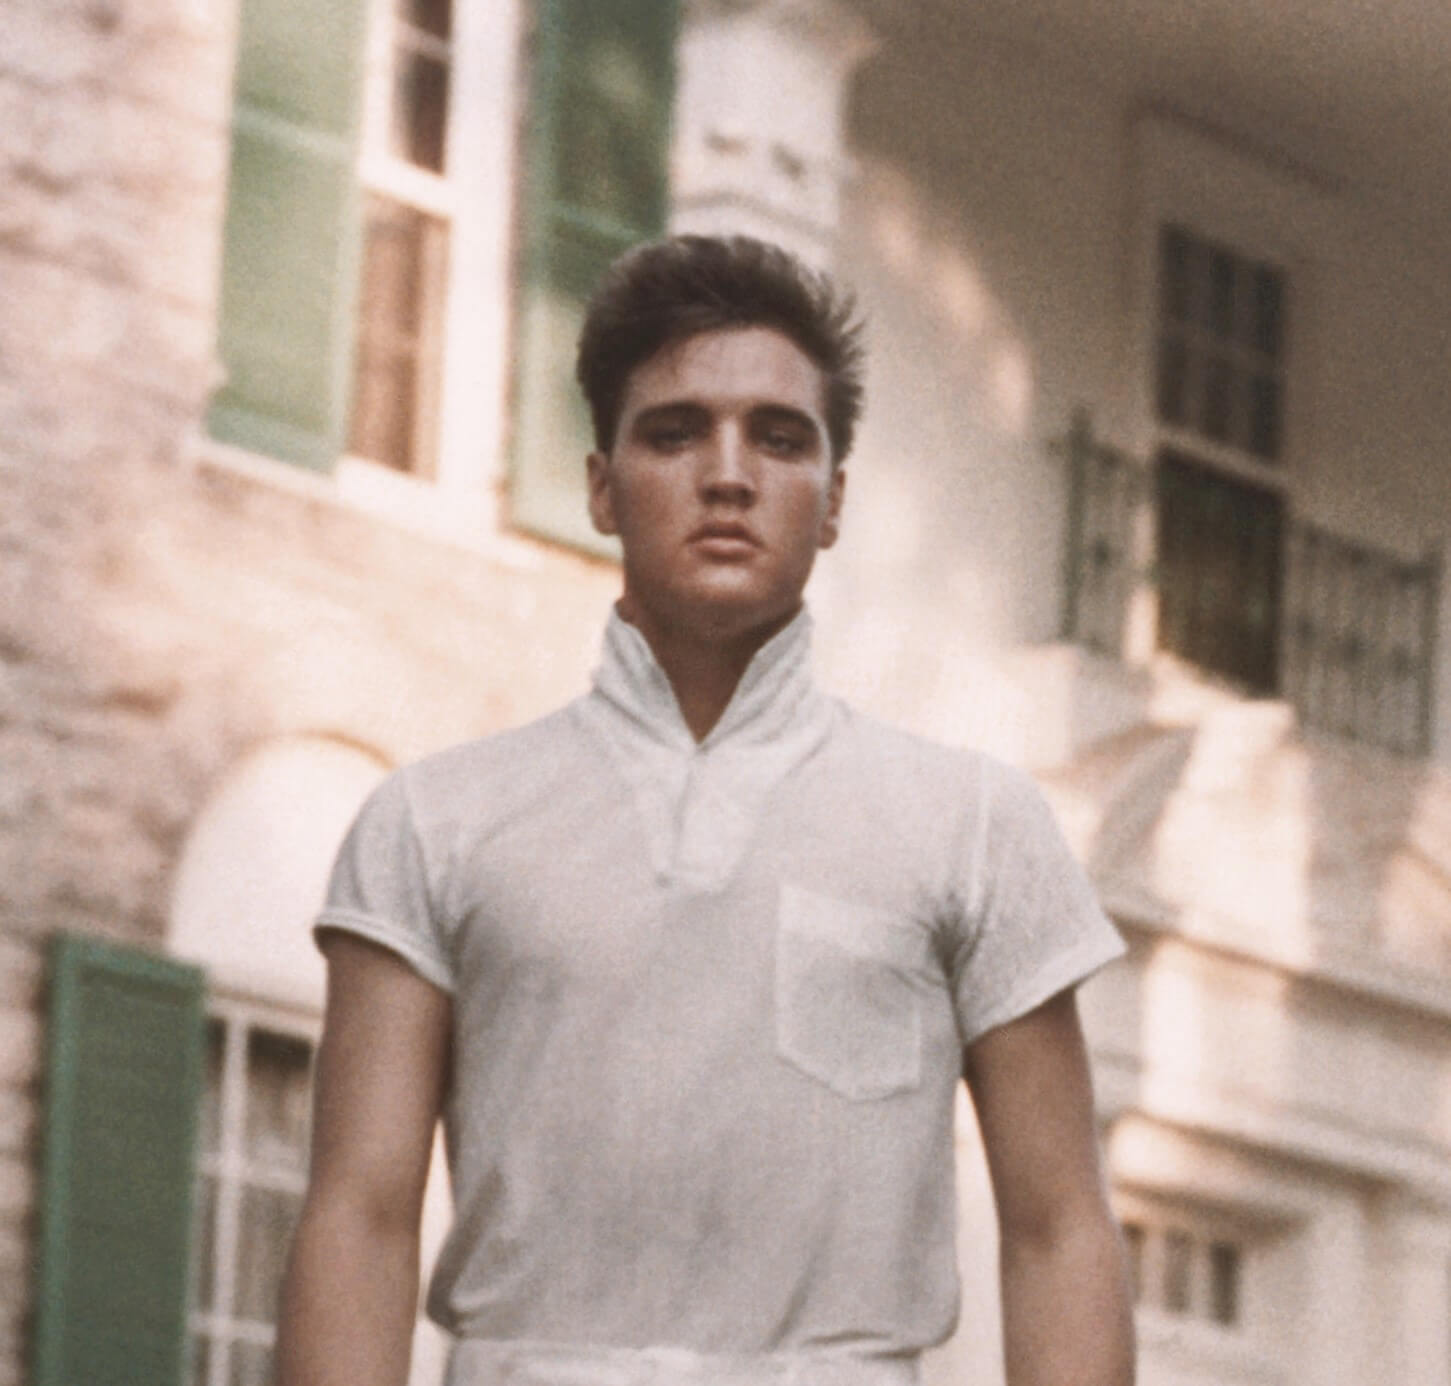 "In the Ghetto" singer Elvis Presley wearing a polo shirt